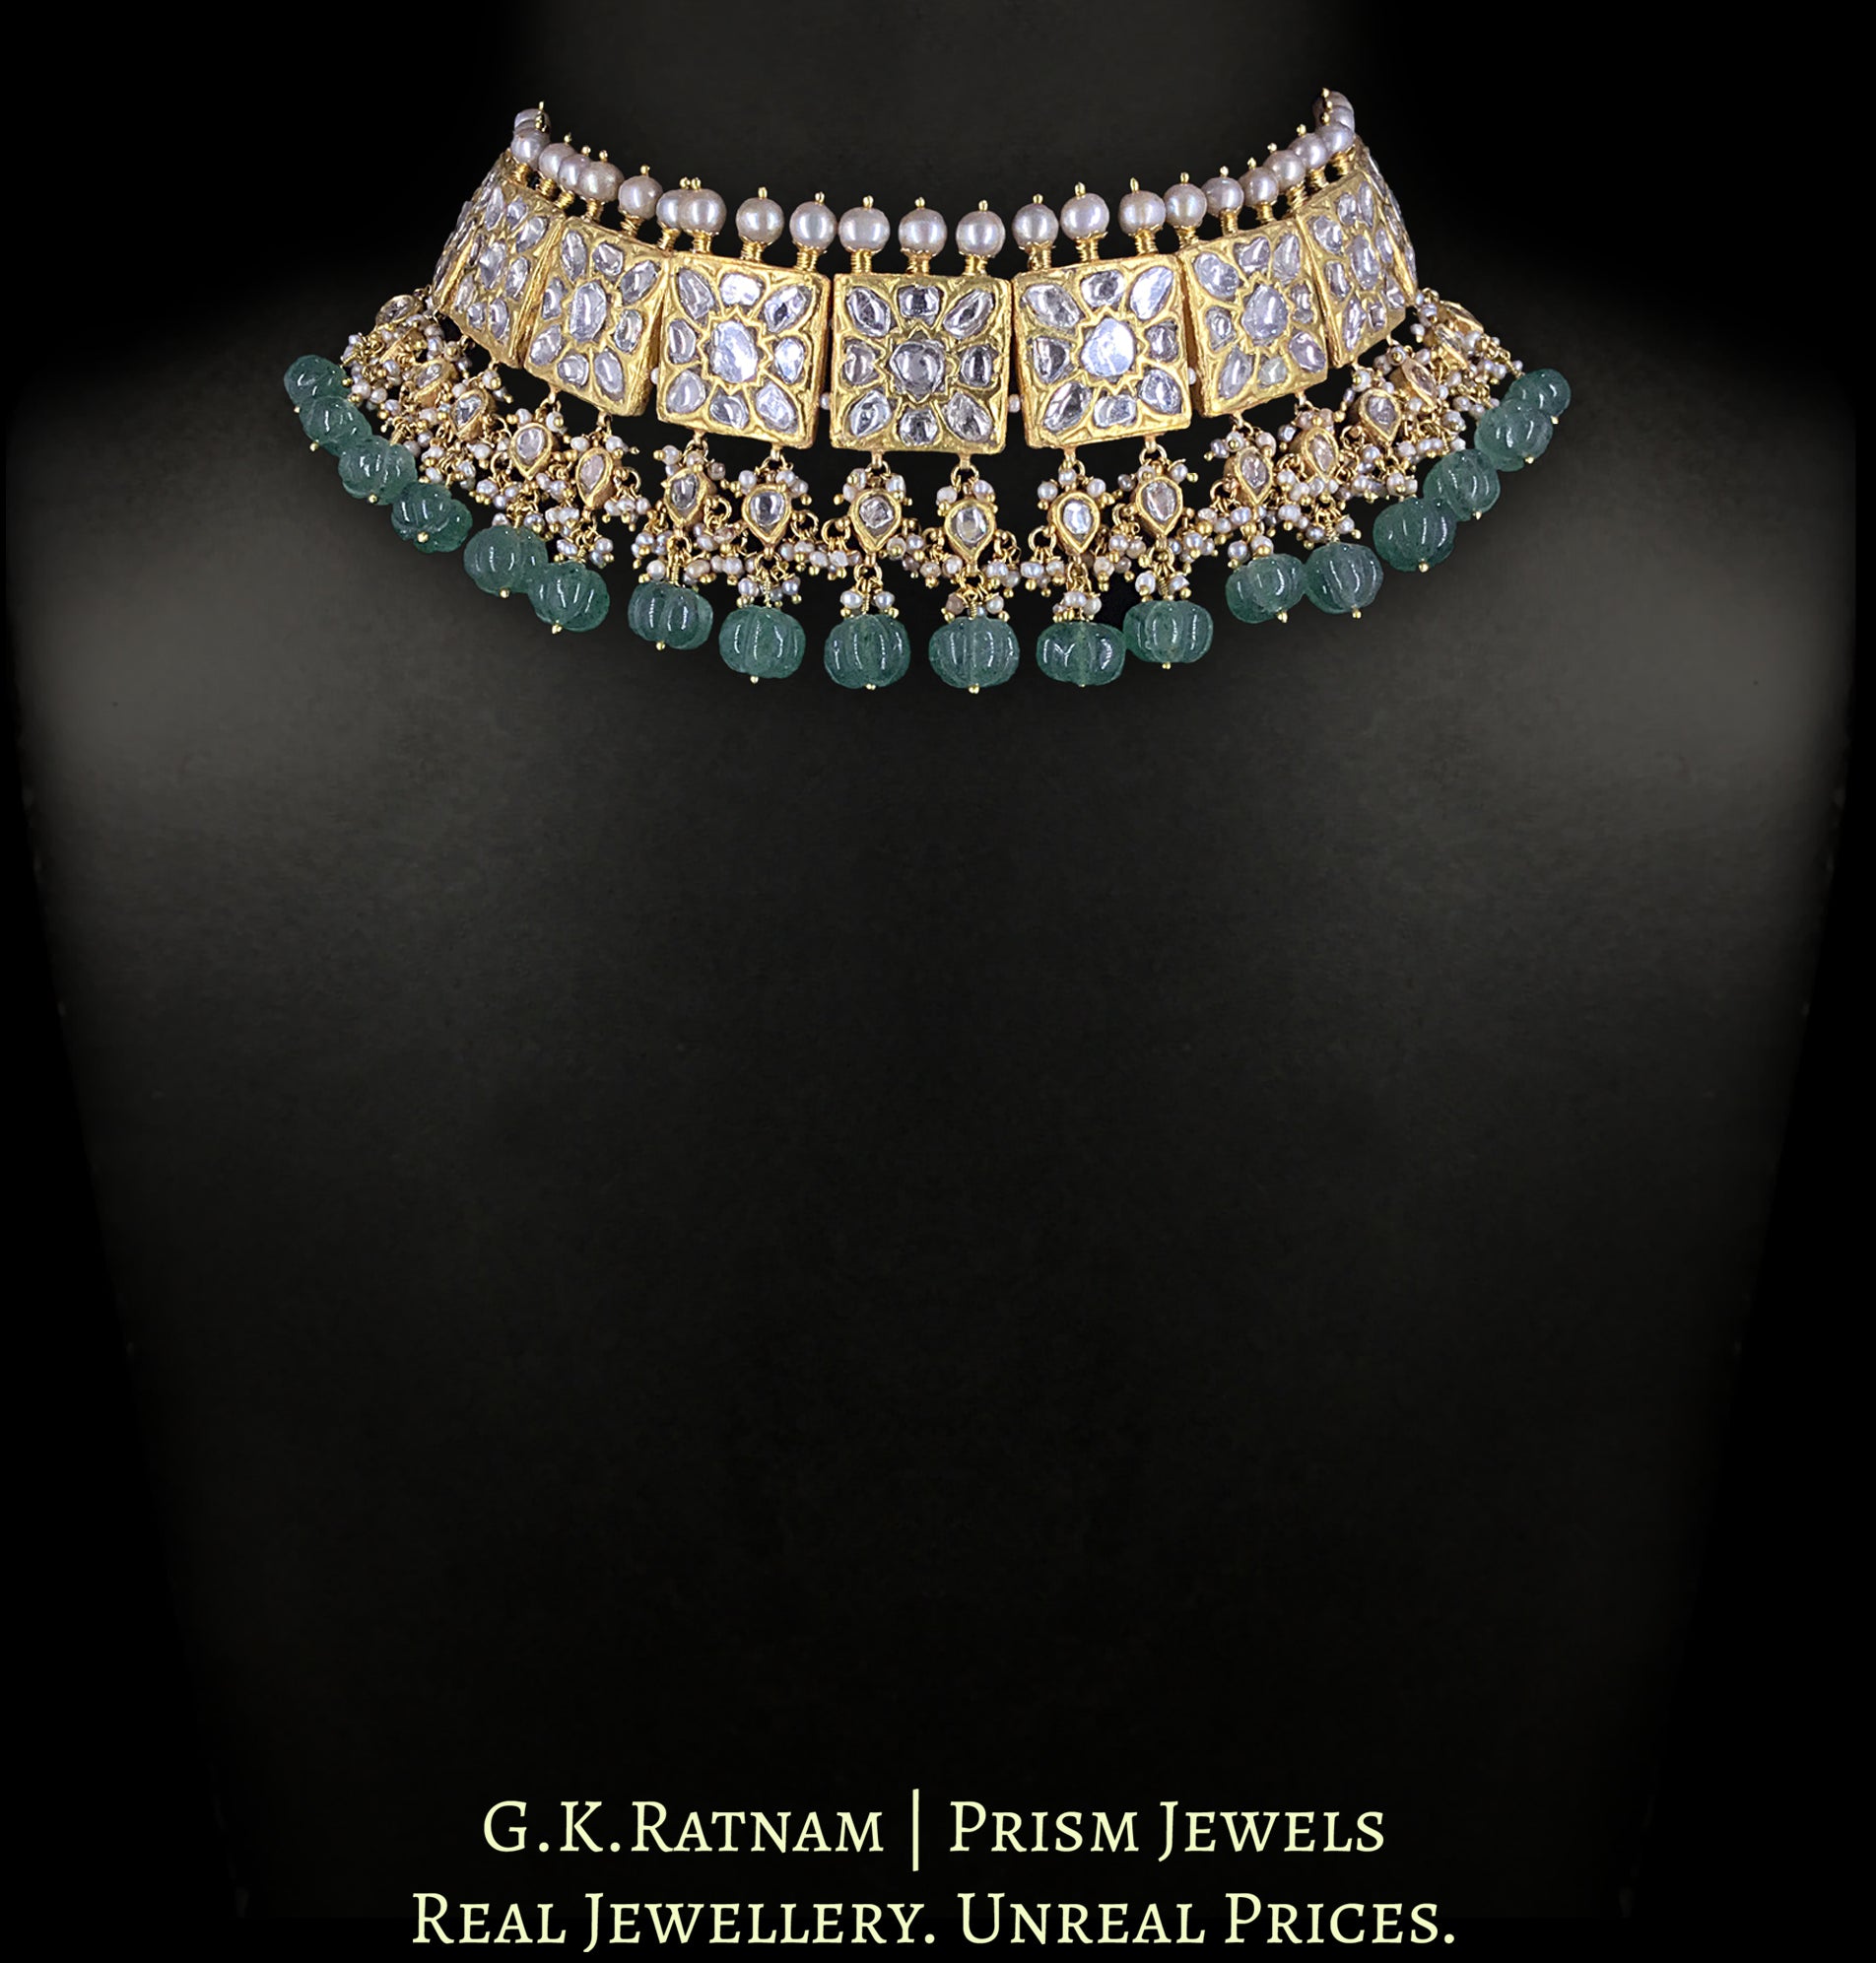 23k Gold and Diamond Polki Square Choker Necklace Set with Antiqued Hyderabadi Pearl Spikes